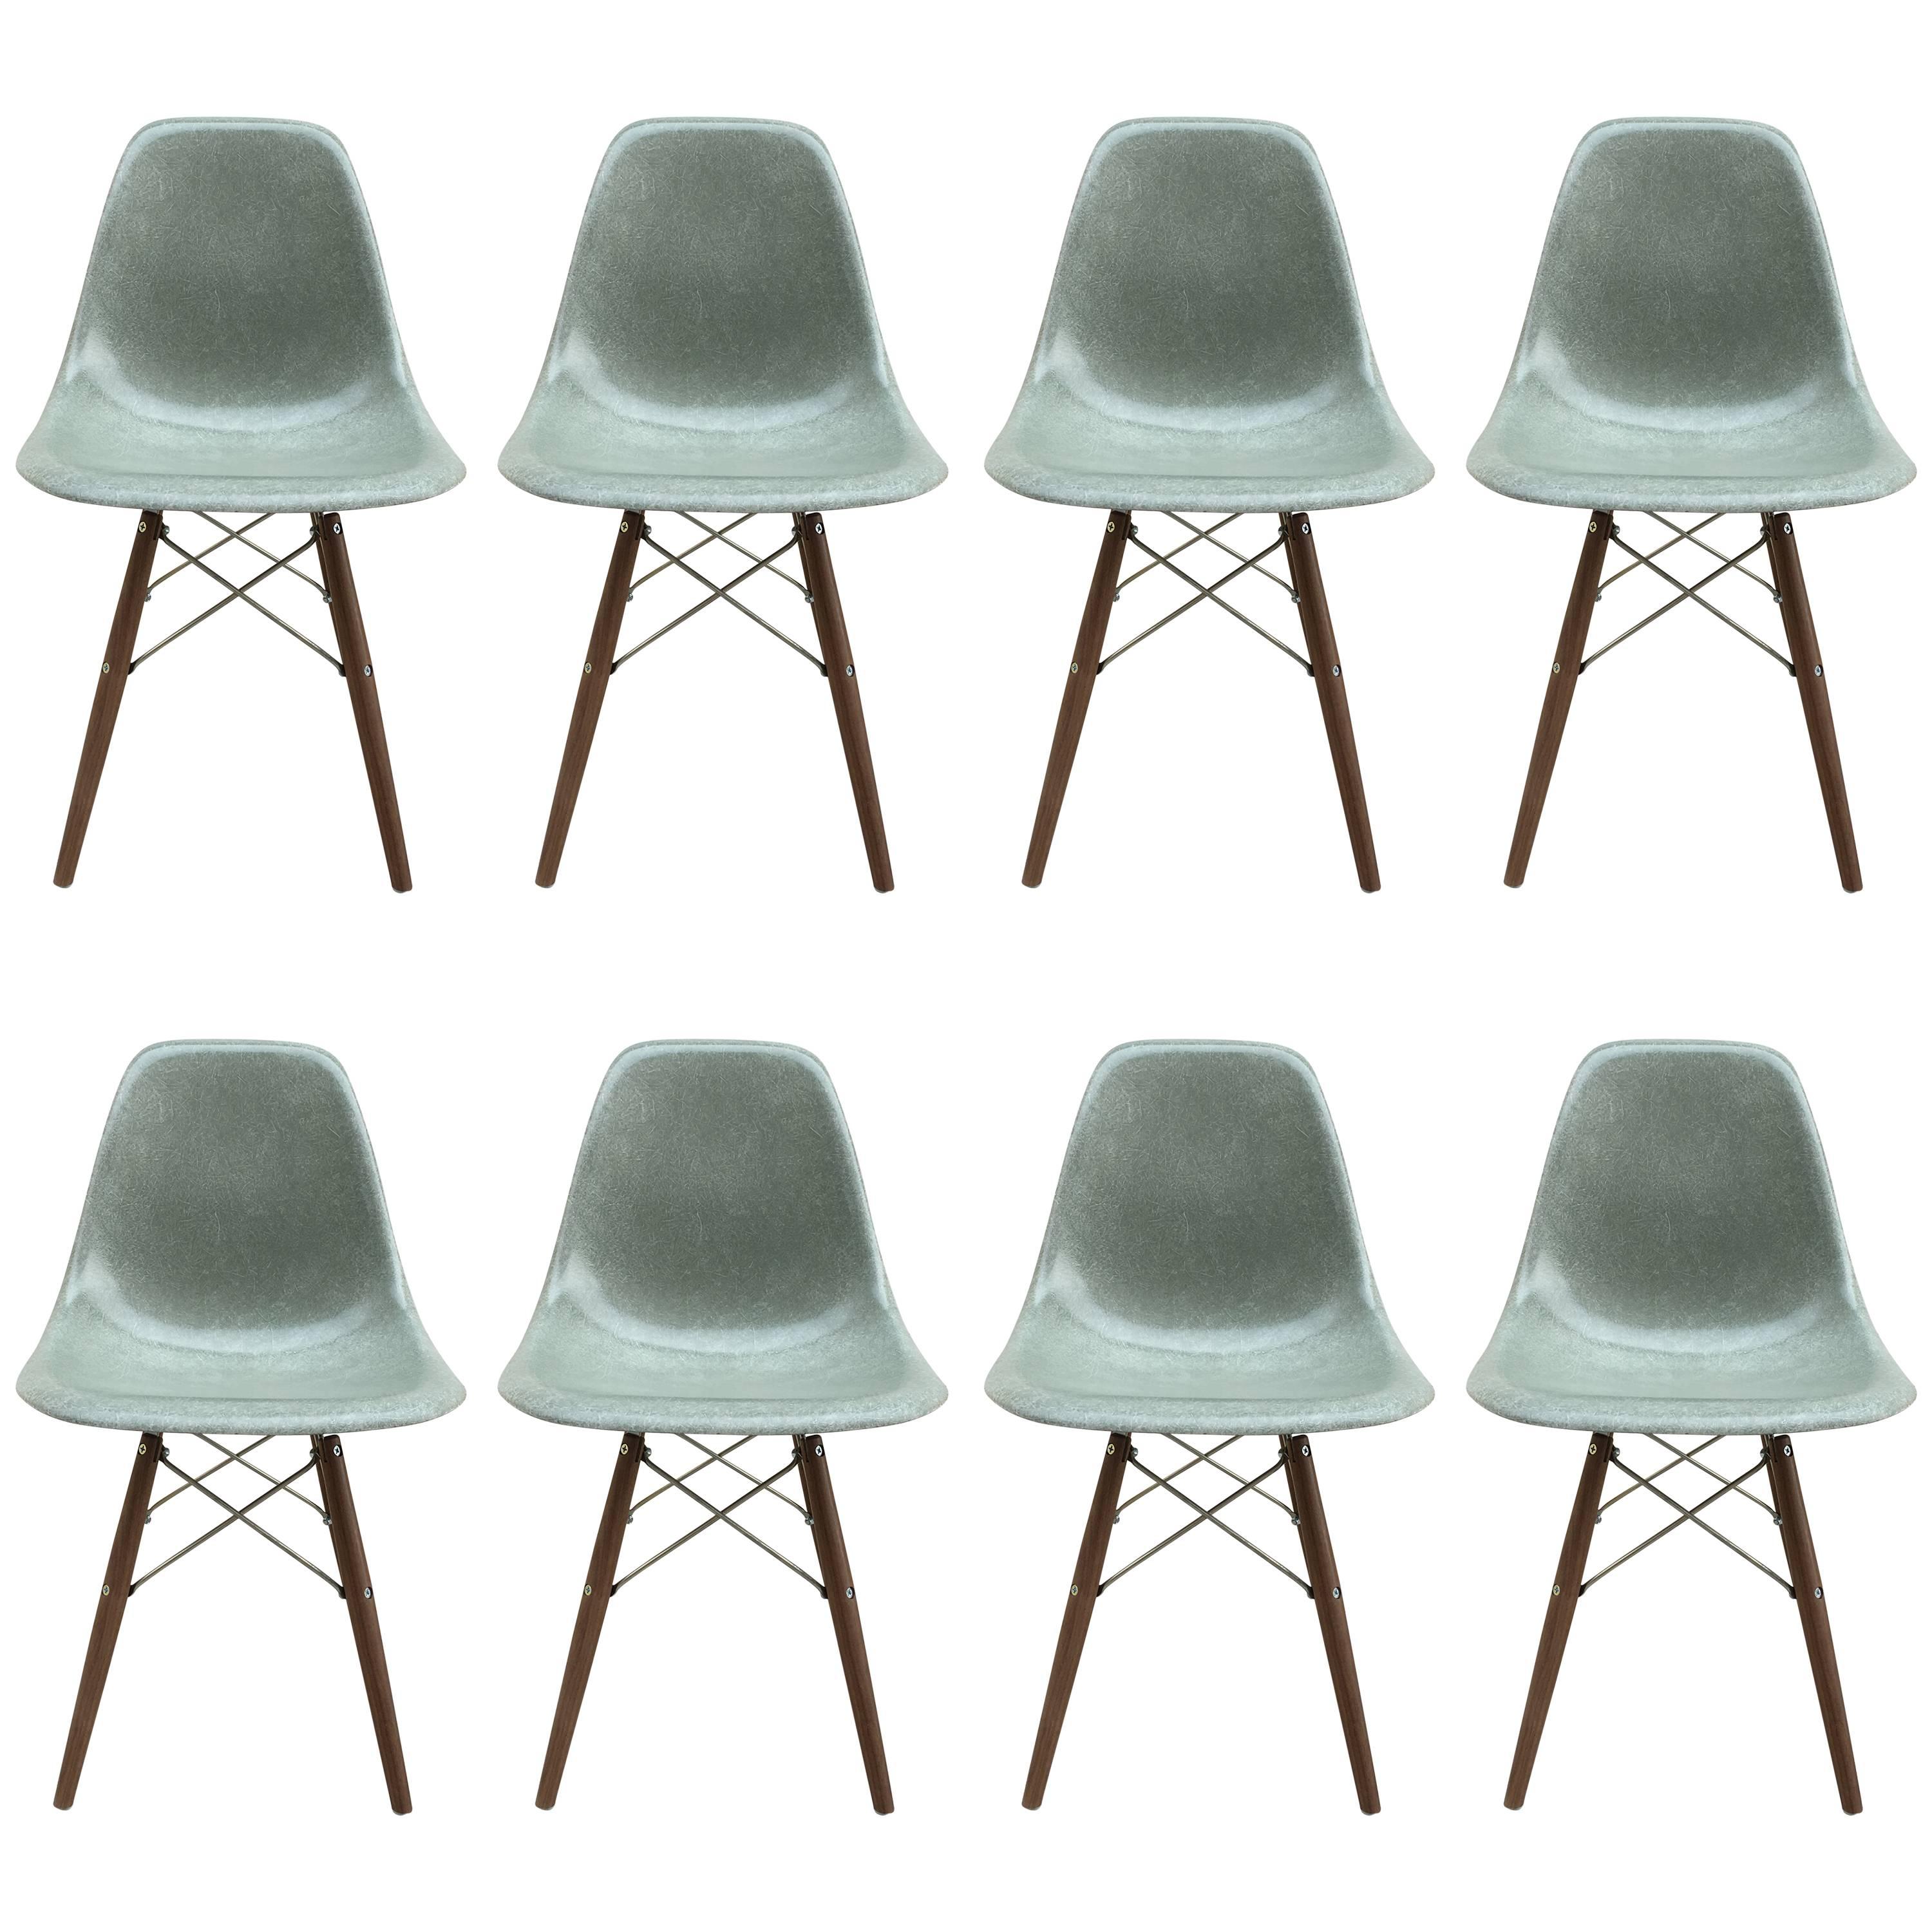 Eight Herman Miller Eames Seafoam Green Dining Chairs